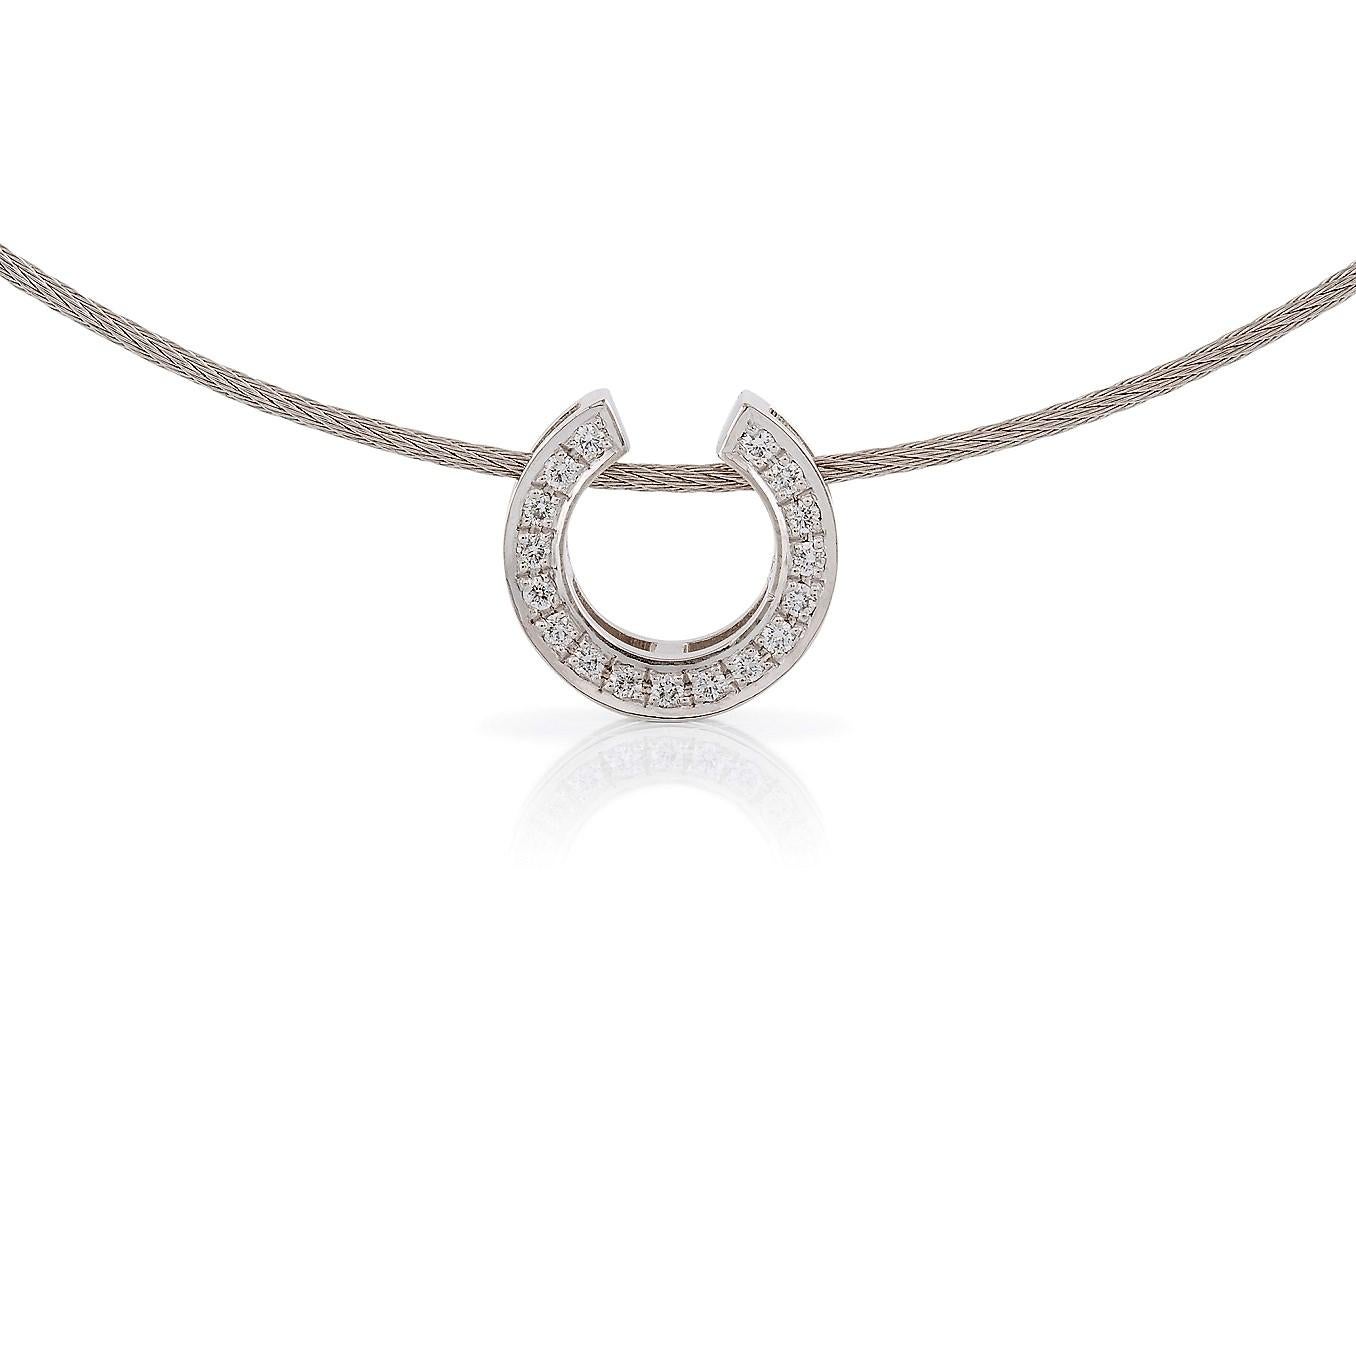 Horseshoe Pendant

This gorgeous petite pendant features a stunning  white diamonds. The circular setting is suspended from an elegant 18 carat white gold cable chain.

Round brilliant cut diamonds: F colour, SI clarity, 17x 1.20mm = 0.14ct total